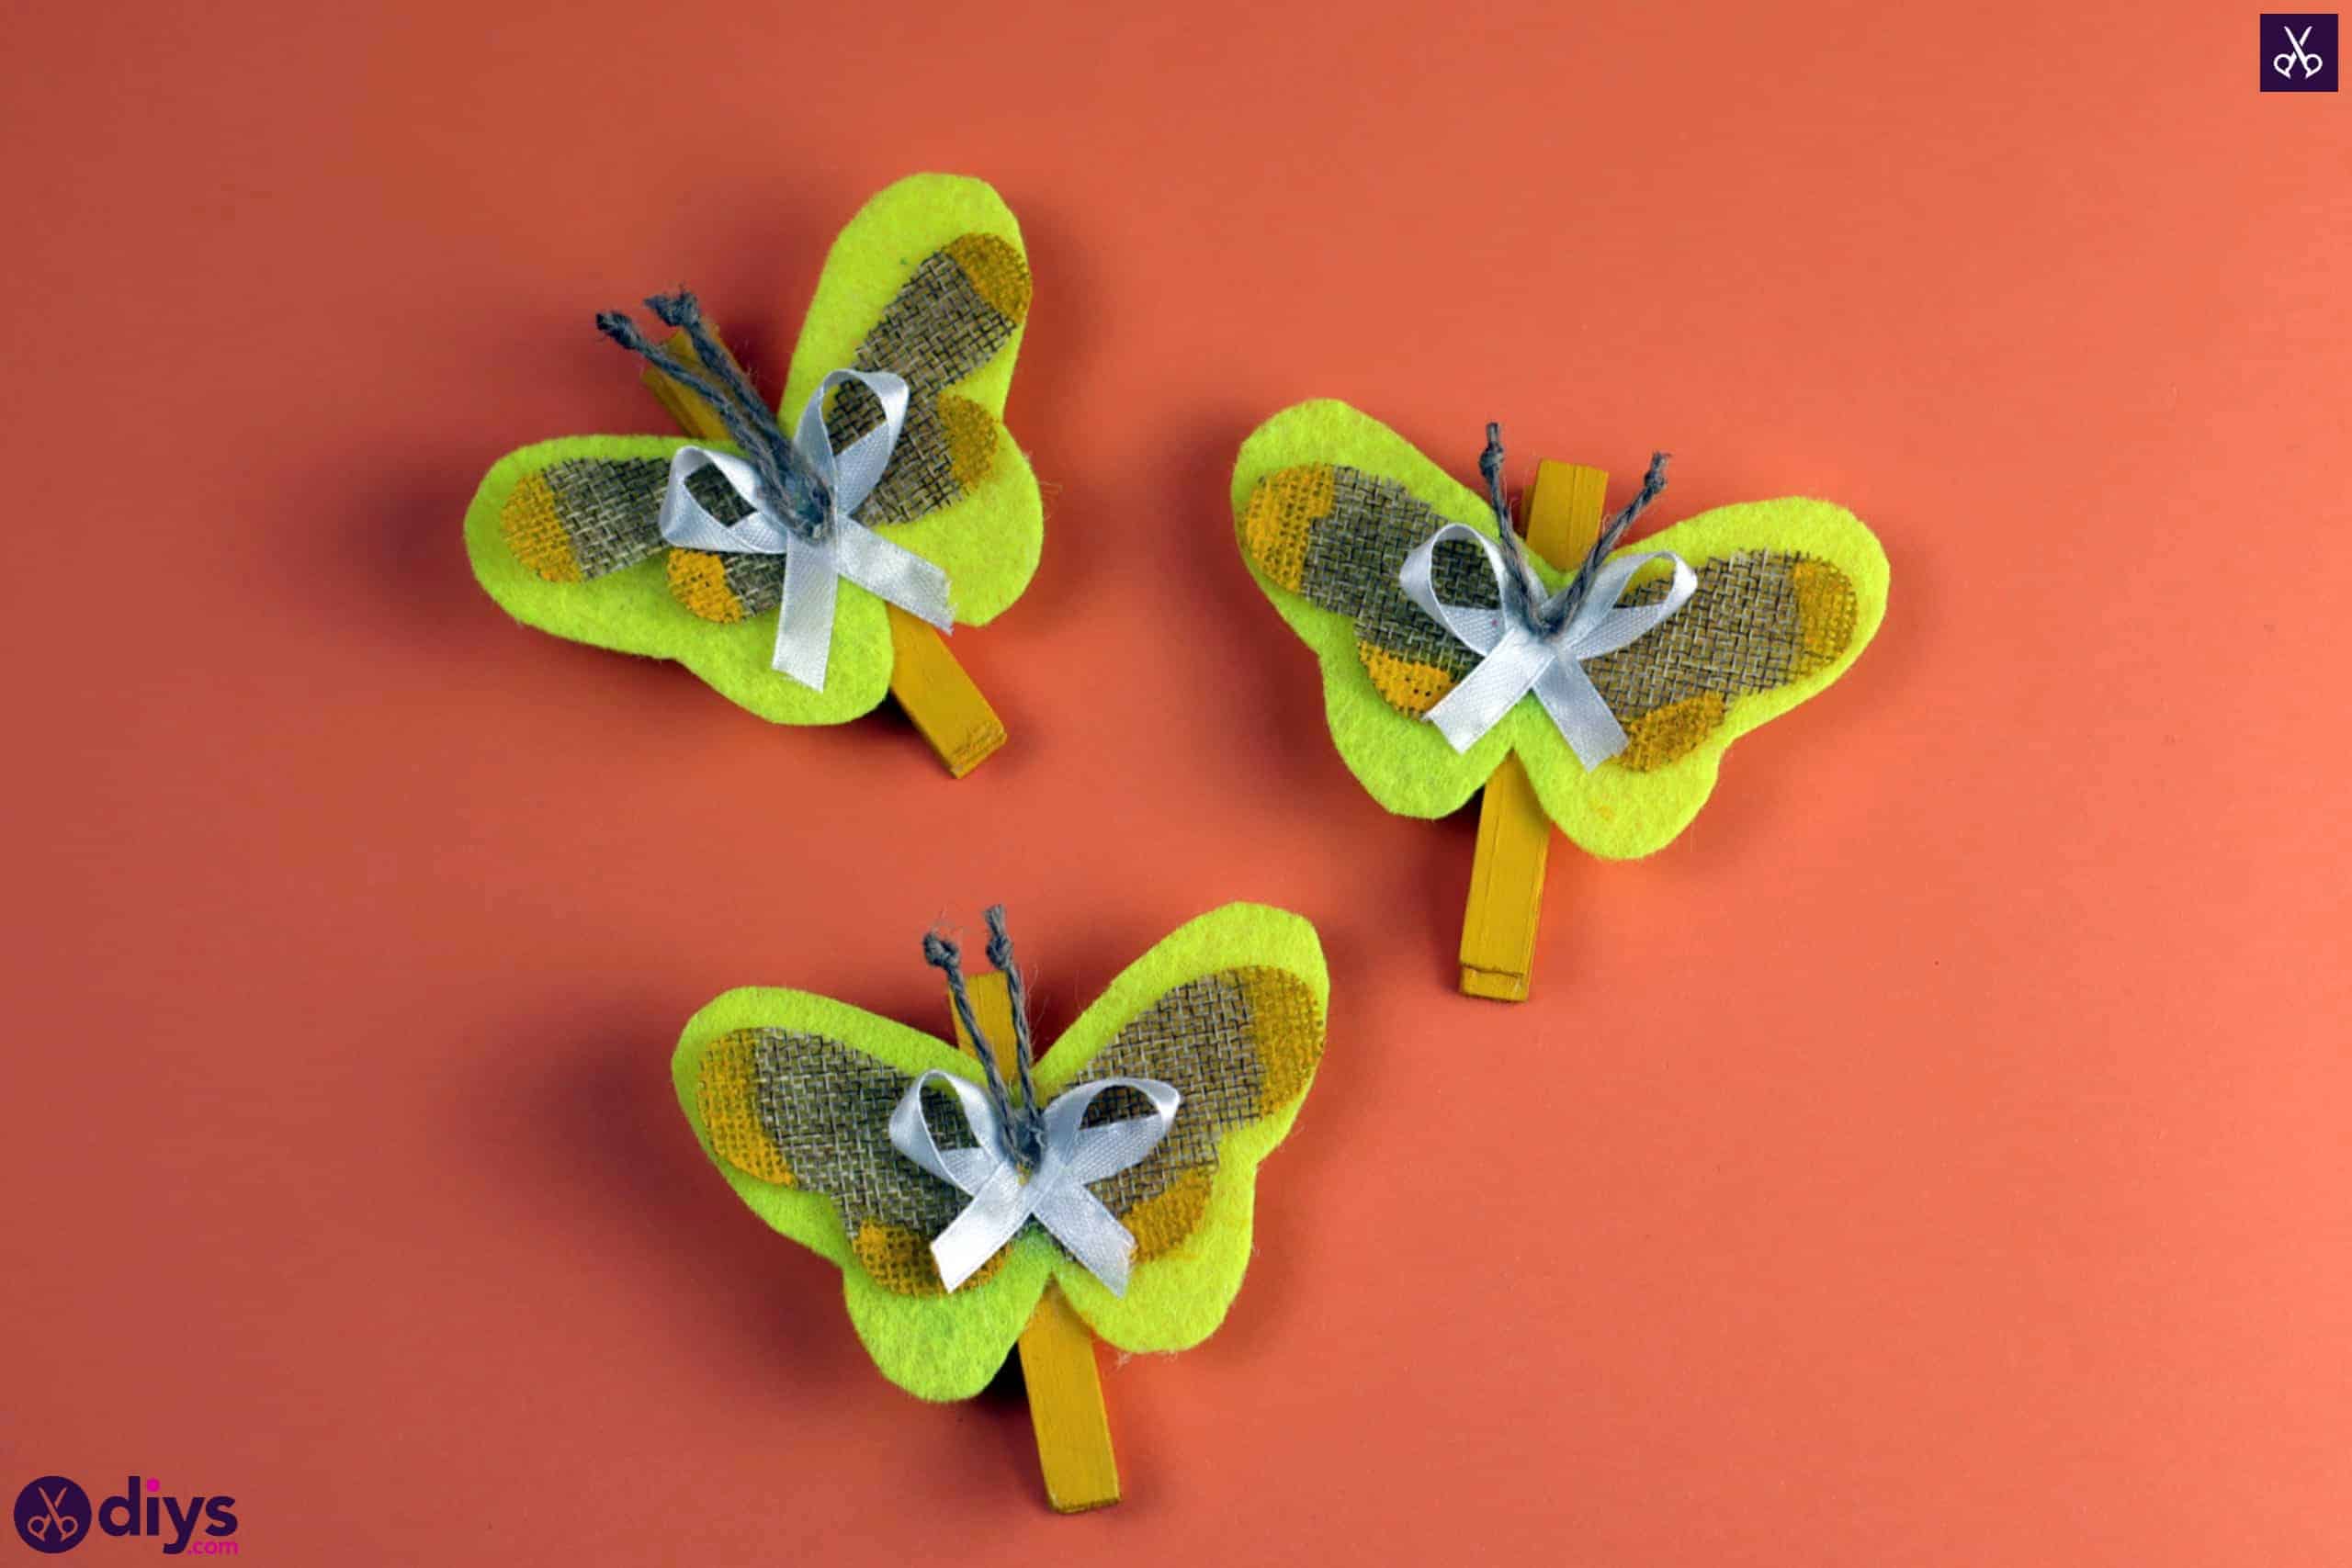 How to craft a butterfly from a clothespin simple colorful project